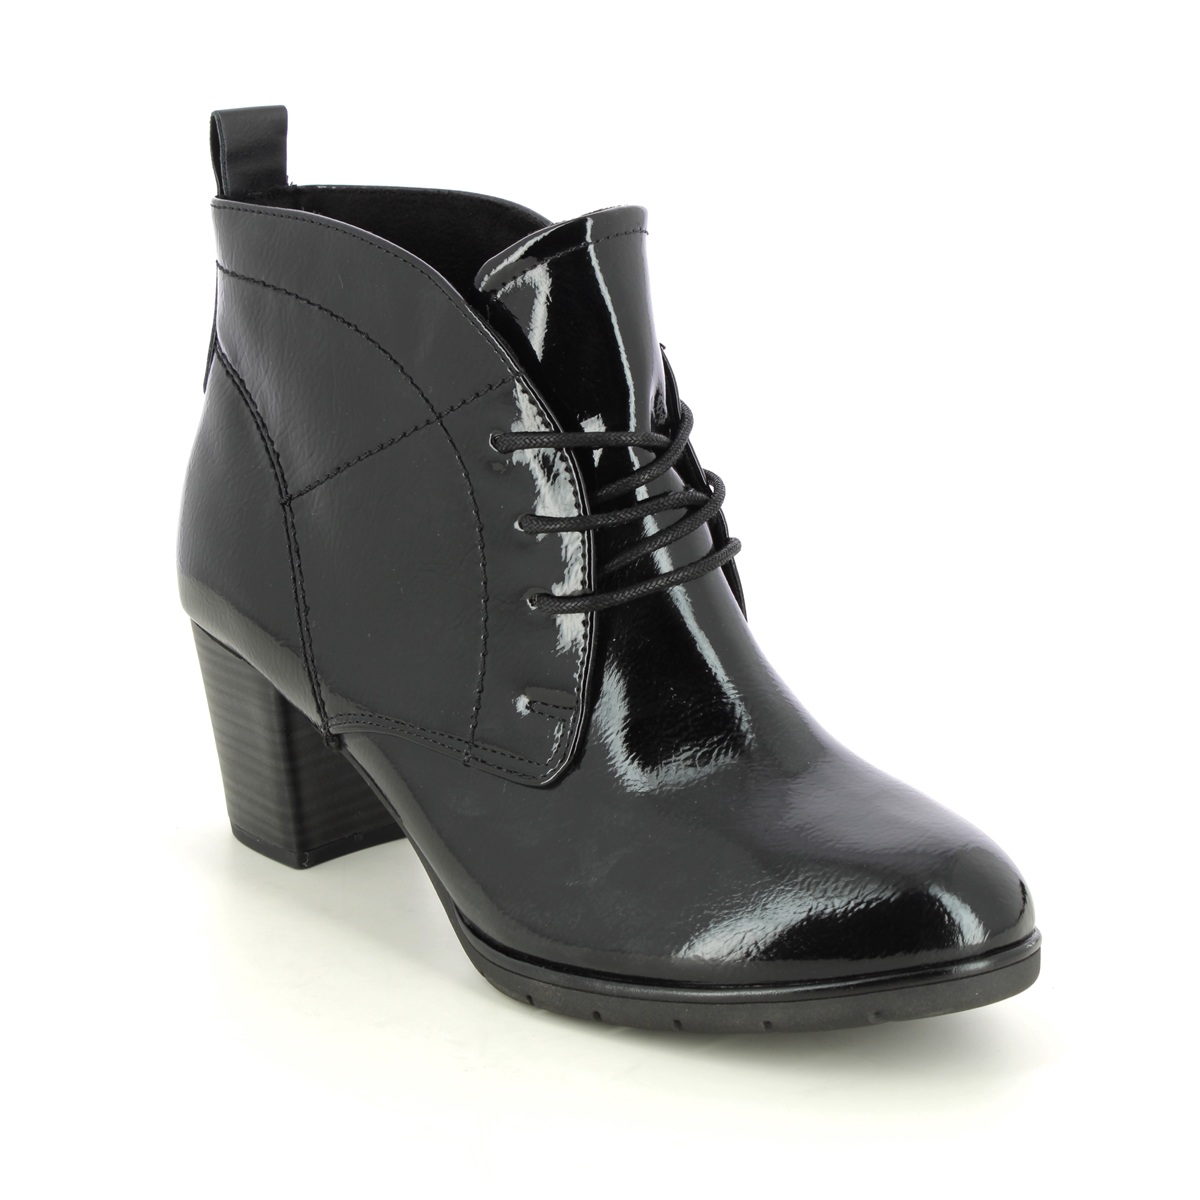 Marco Tozzi Pepalow Black Patent Womens Heeled Boots 25109-41-018 In Size 41 In Plain Black Patent